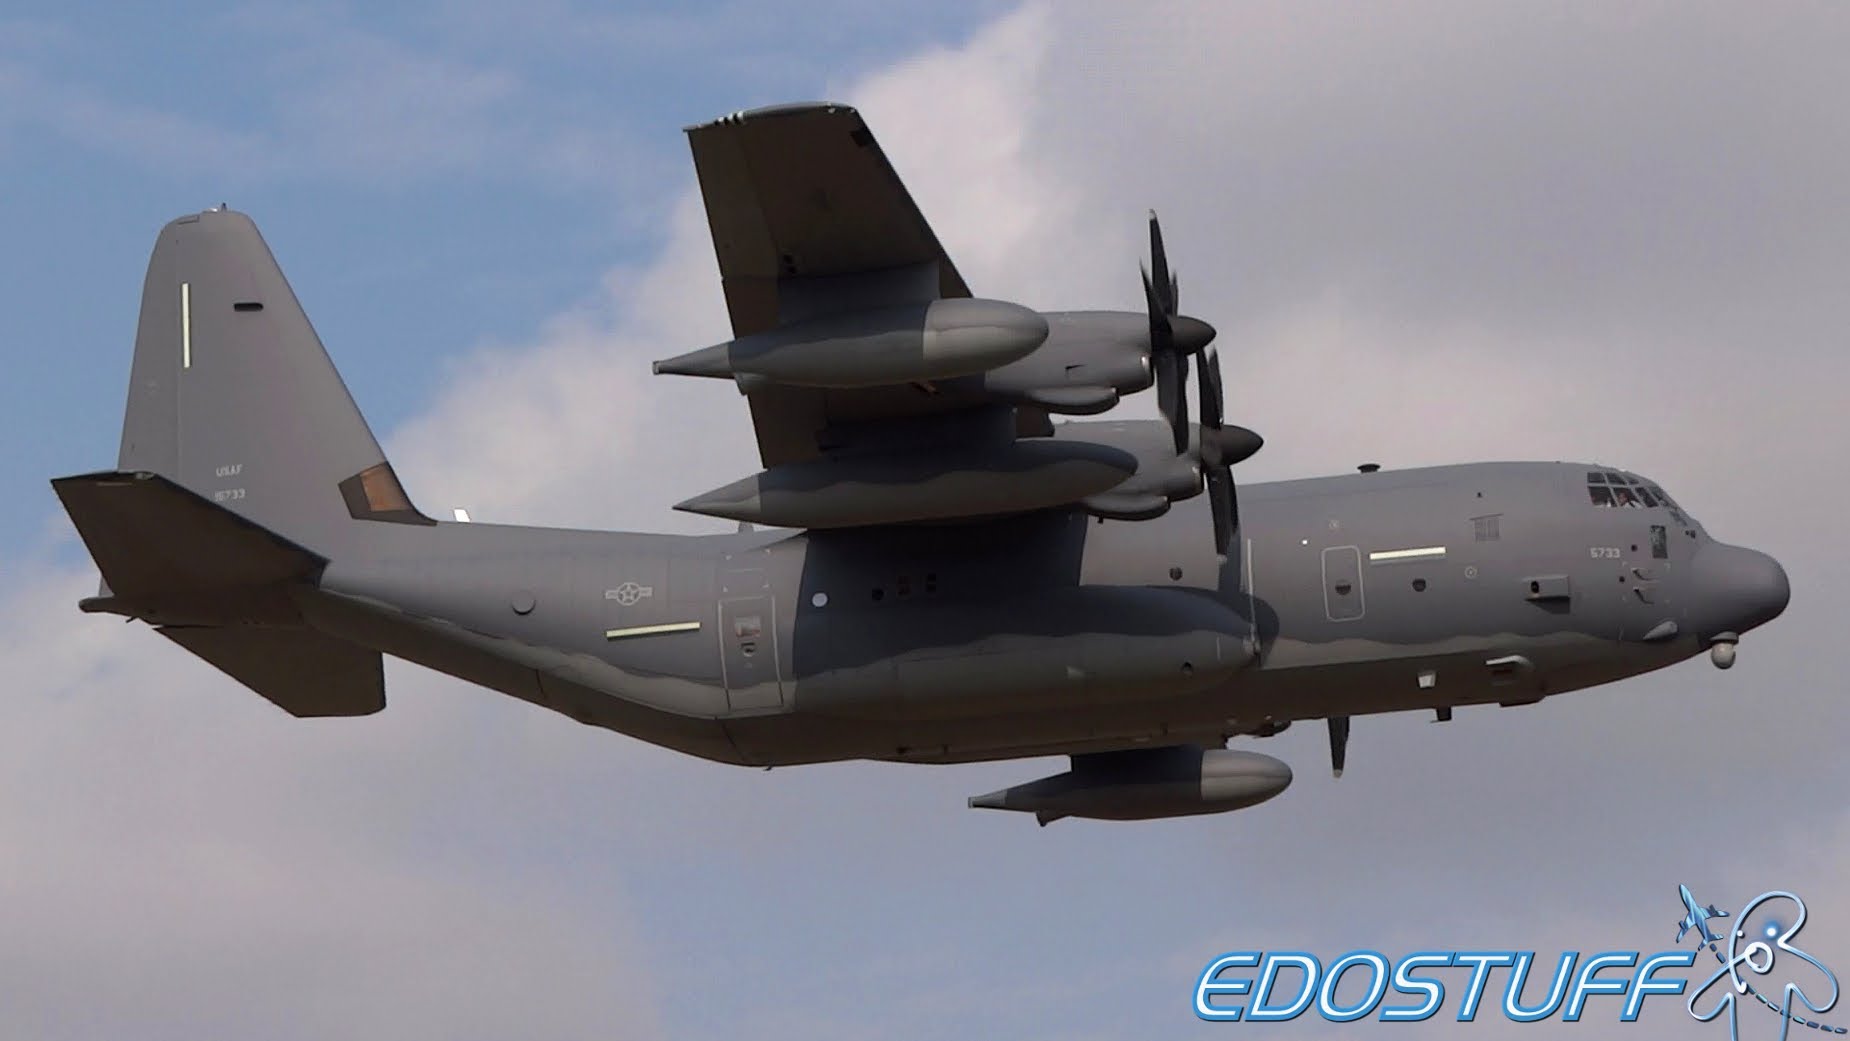 Lockheed MC-130 Backgrounds, Compatible - PC, Mobile, Gadgets| 1850x1041 px